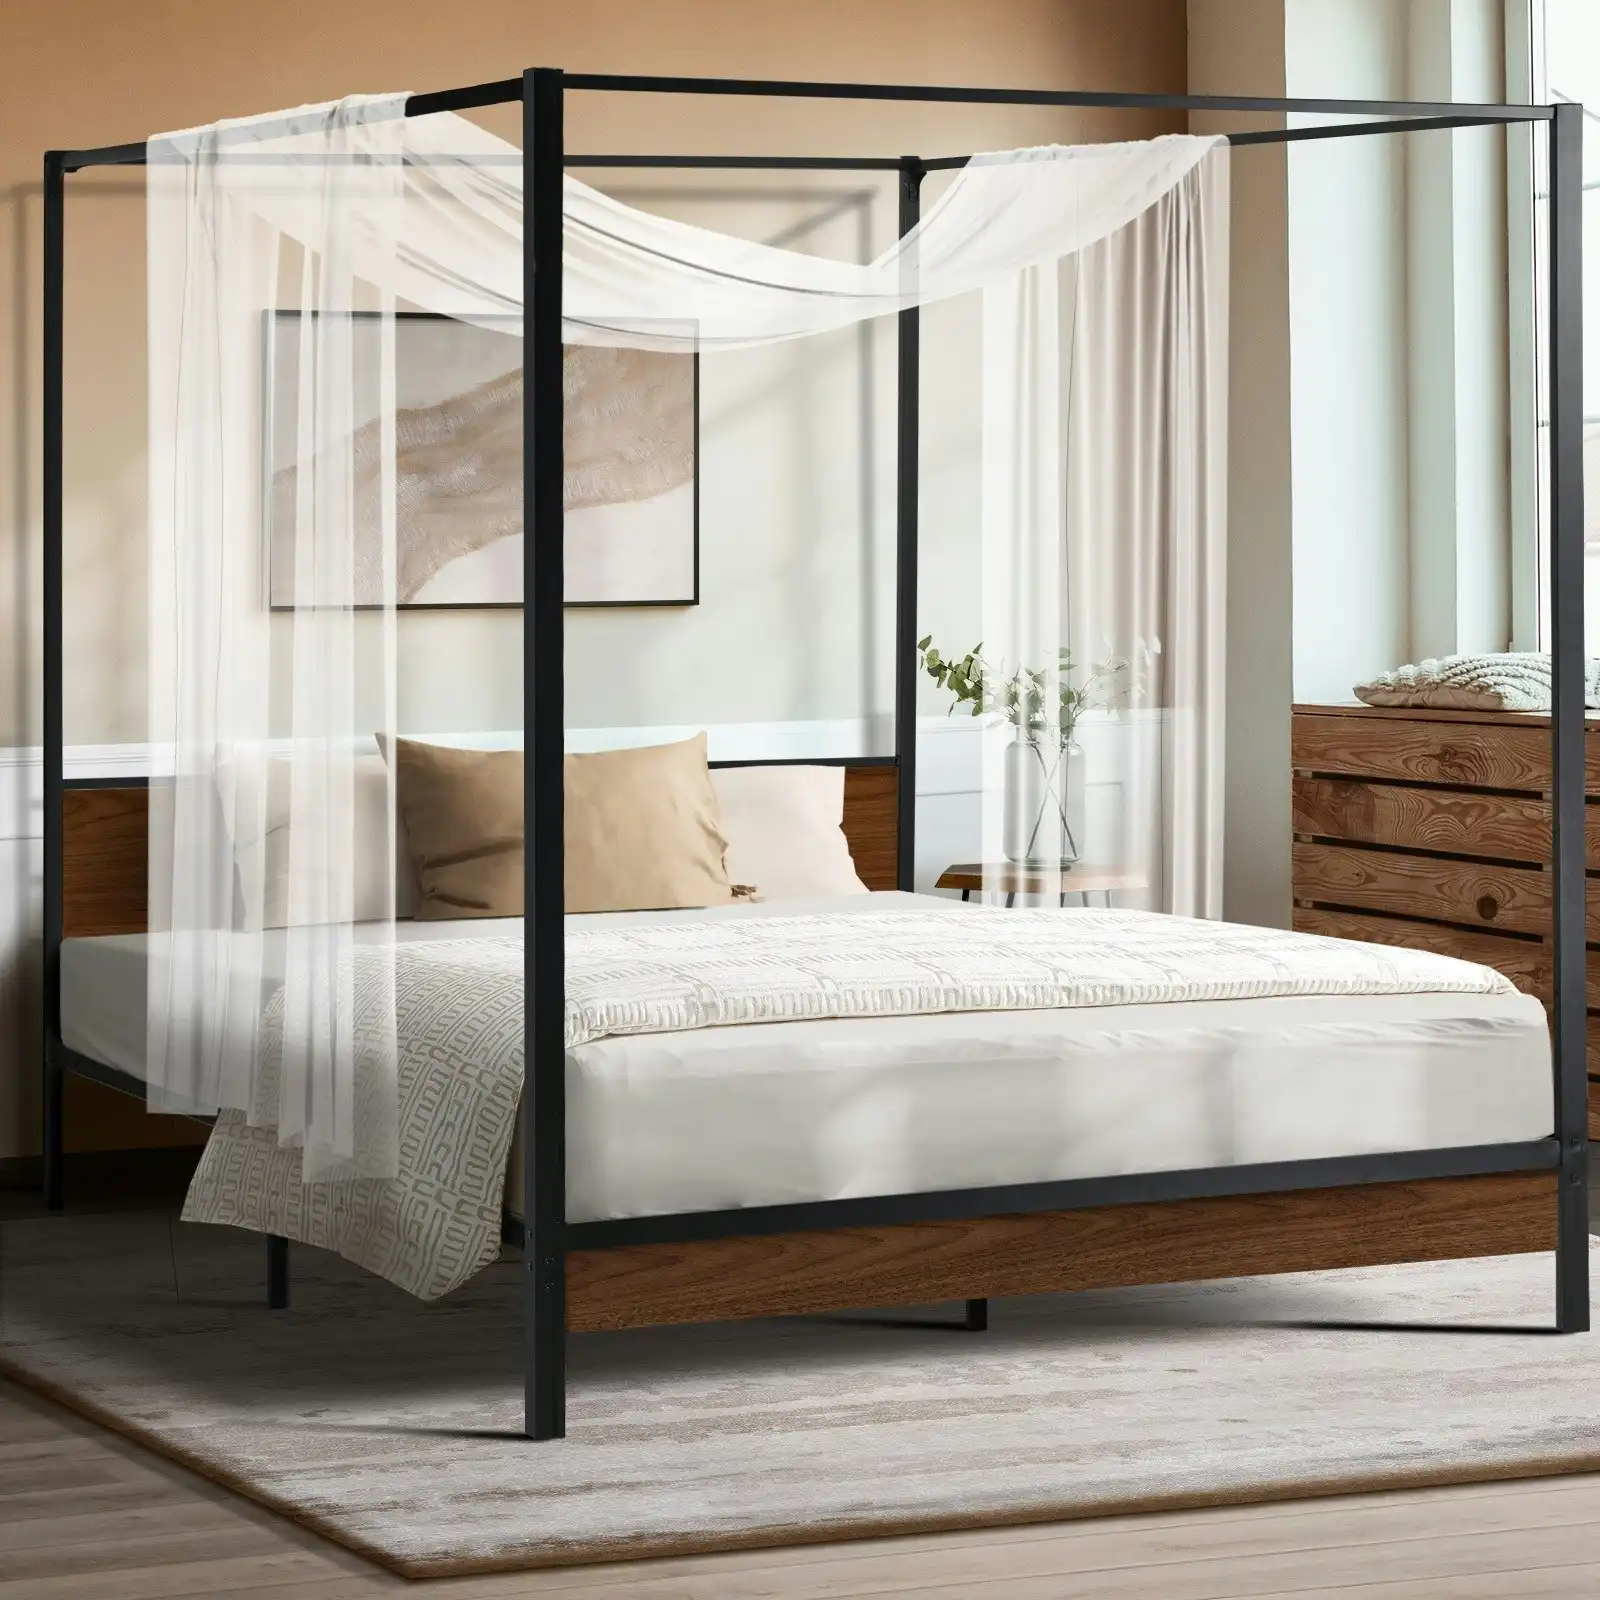 Oikiture Metal Canopy Bed Frame Queen Size Beds Platform